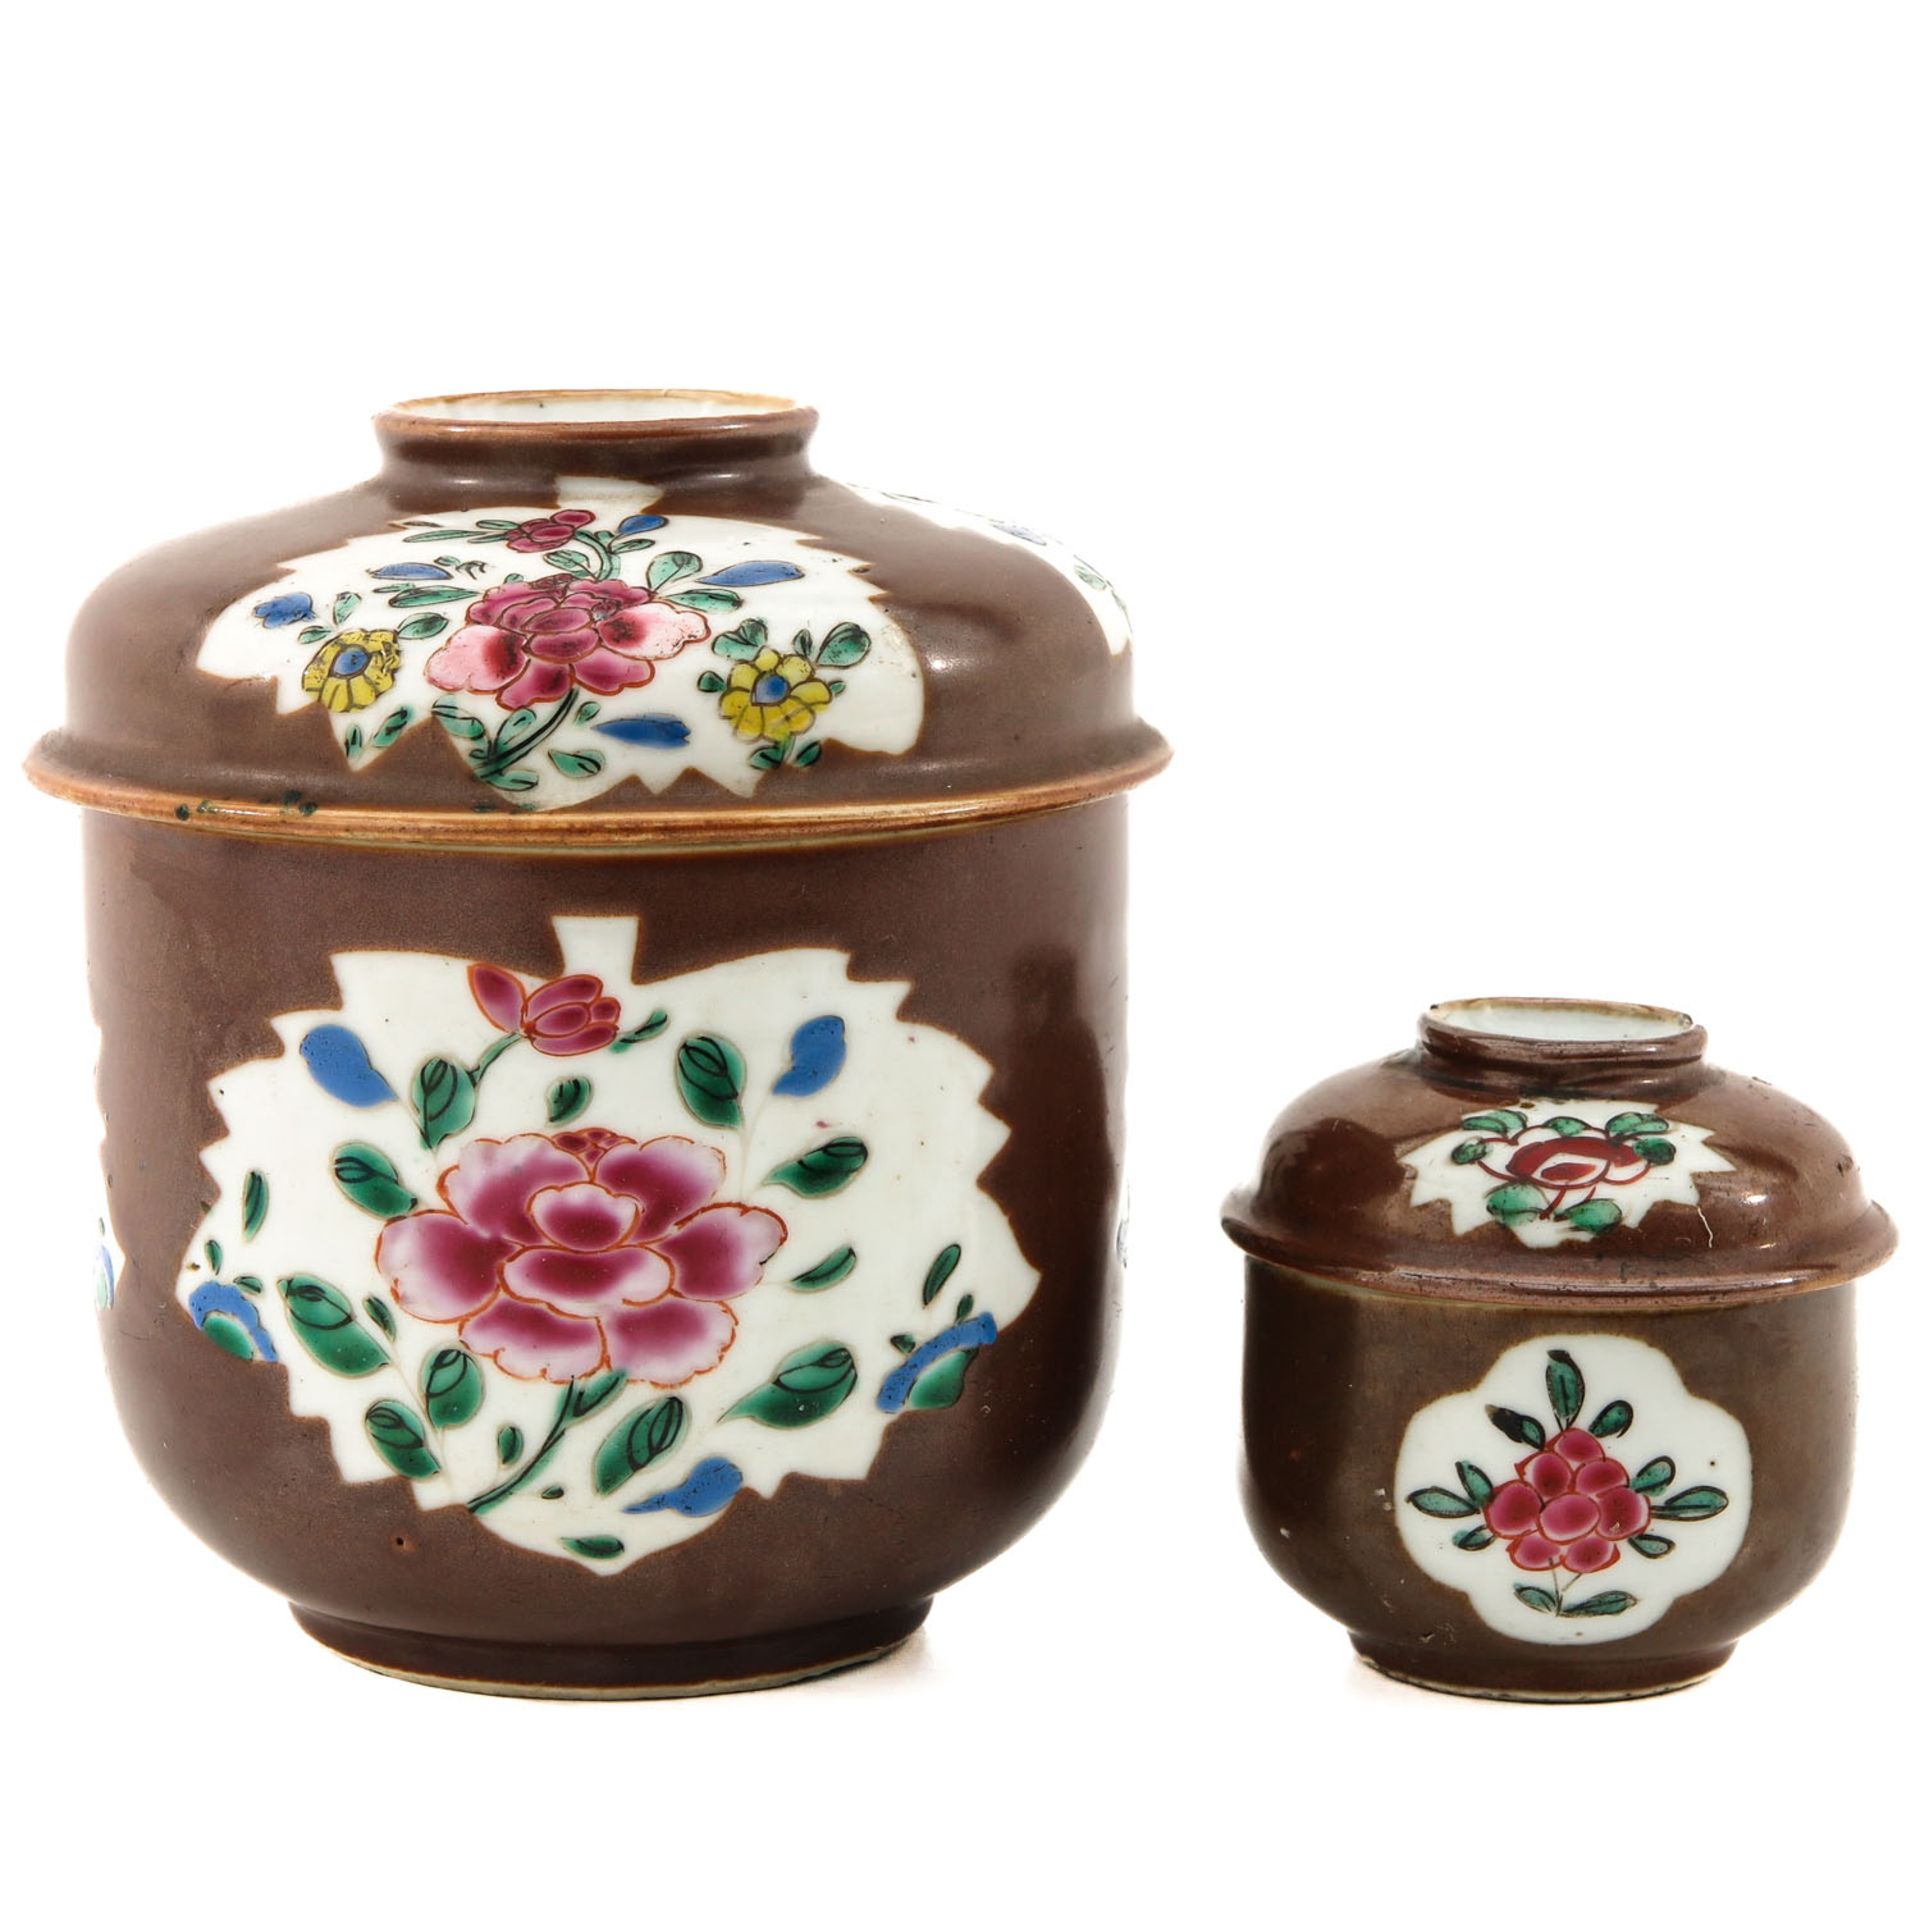 A Set of 2 Batavianware Jars with Covers